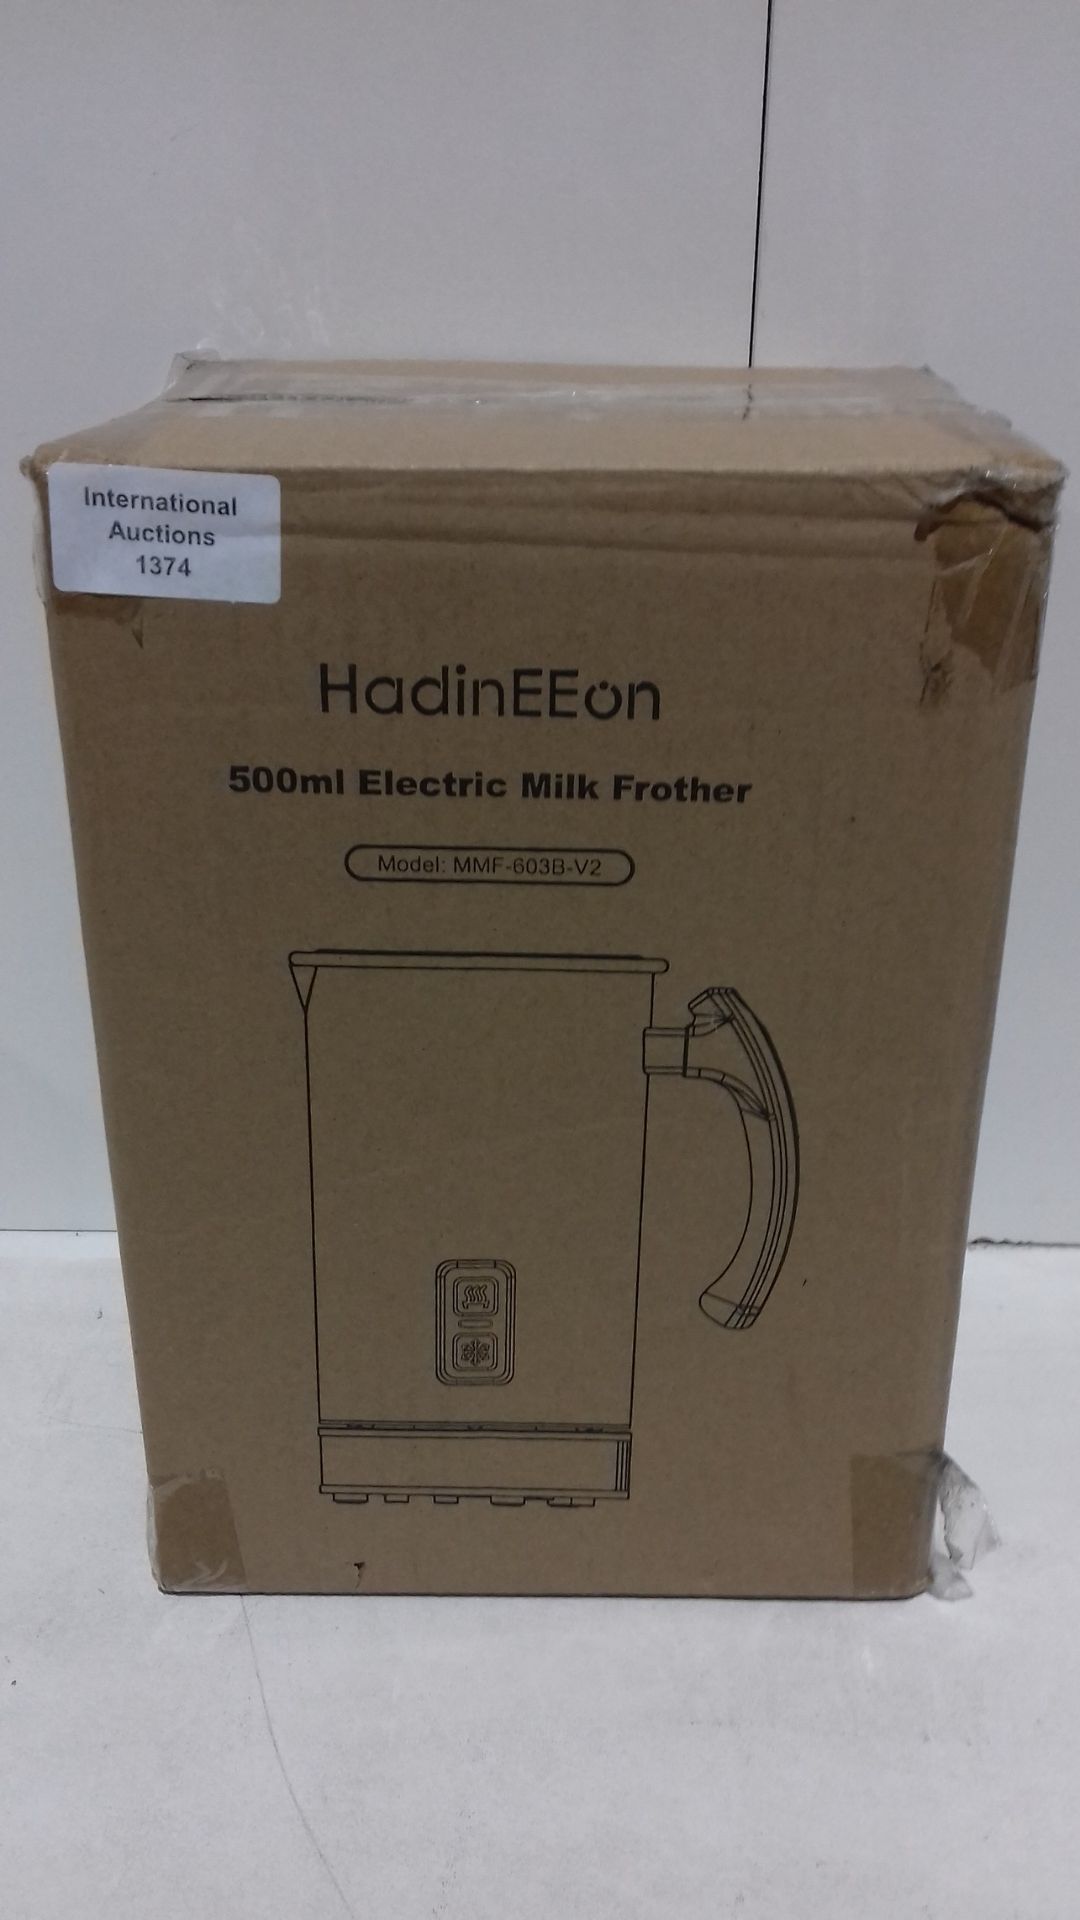 RRP £35.99 SHARDOR Electric Milk Frother - Image 2 of 2